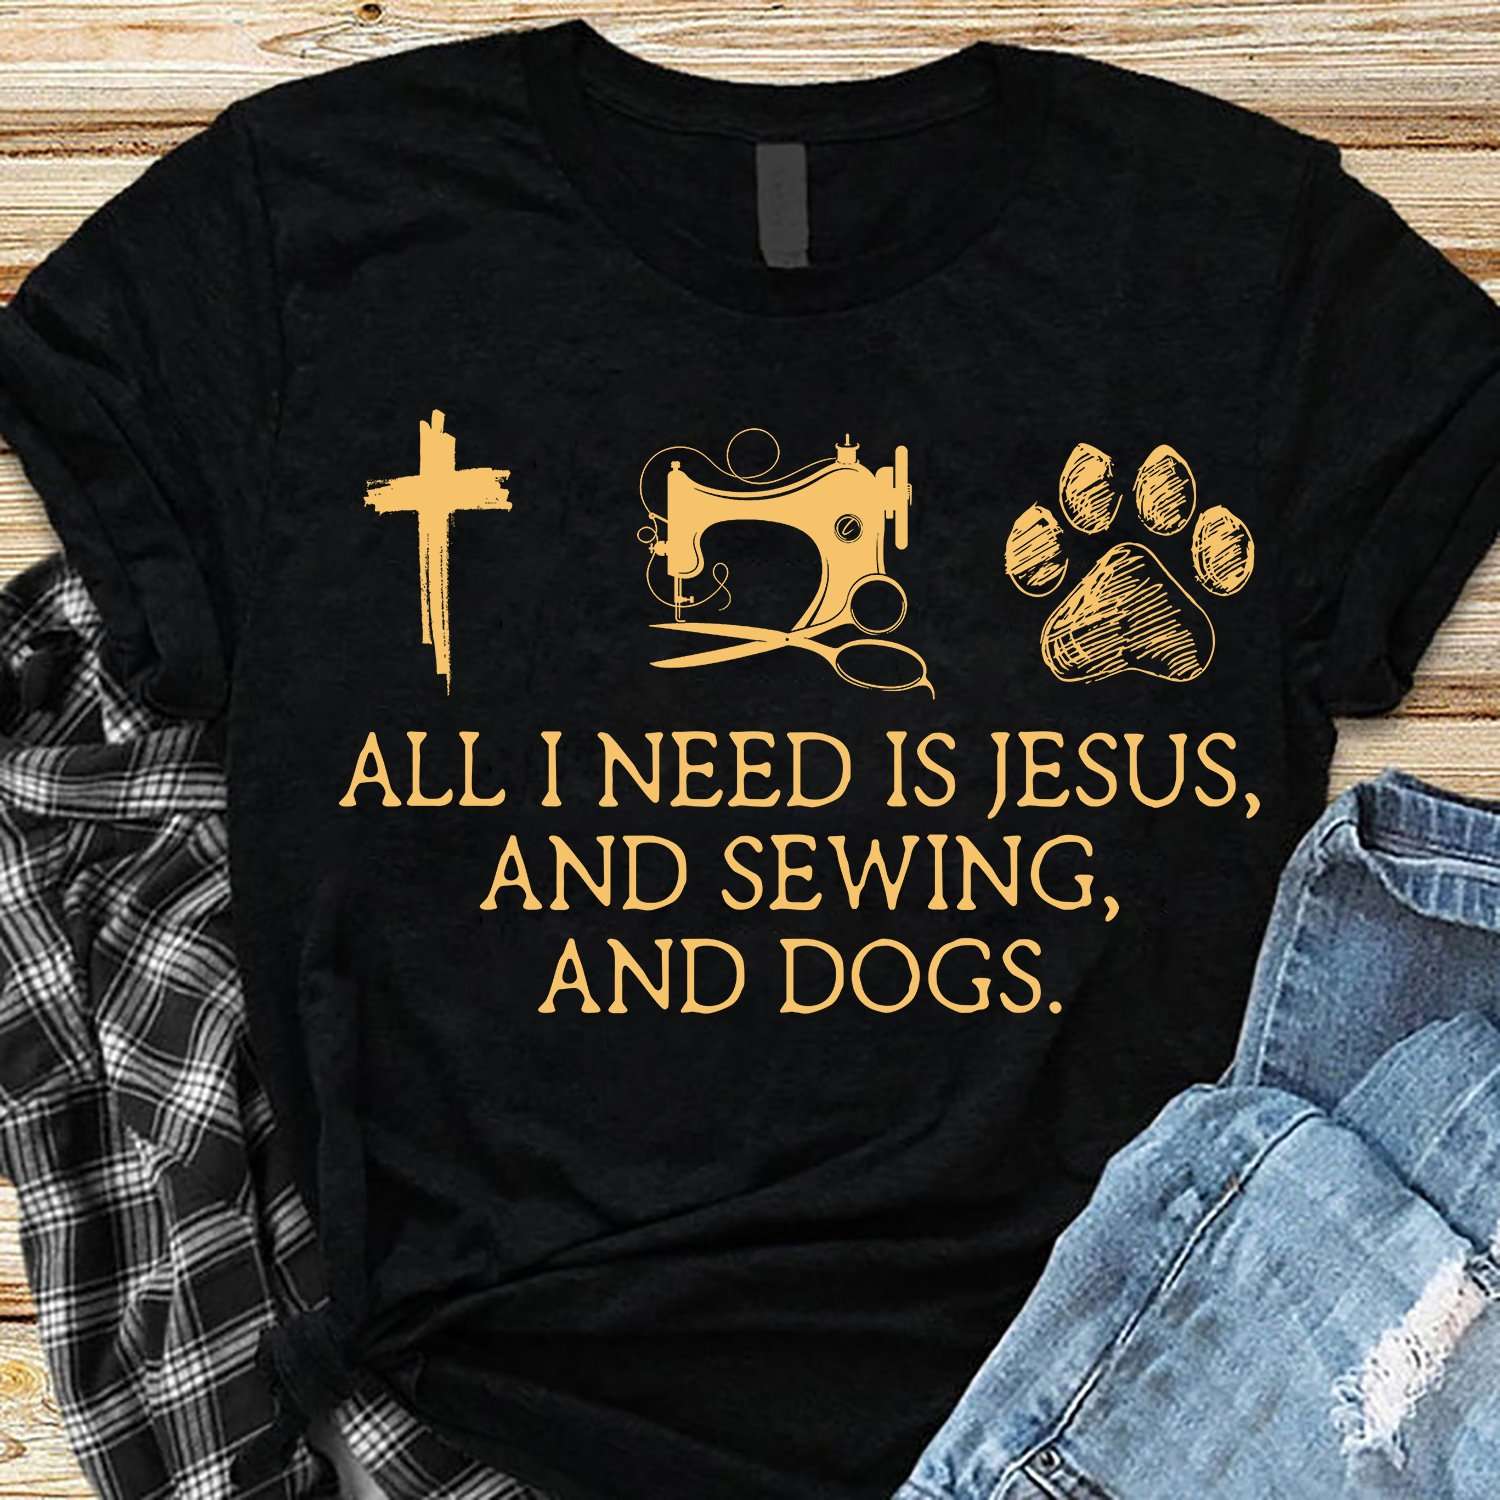 All I need is Jesus and sewing, and dogs - Jesus the god, sewing the hobby